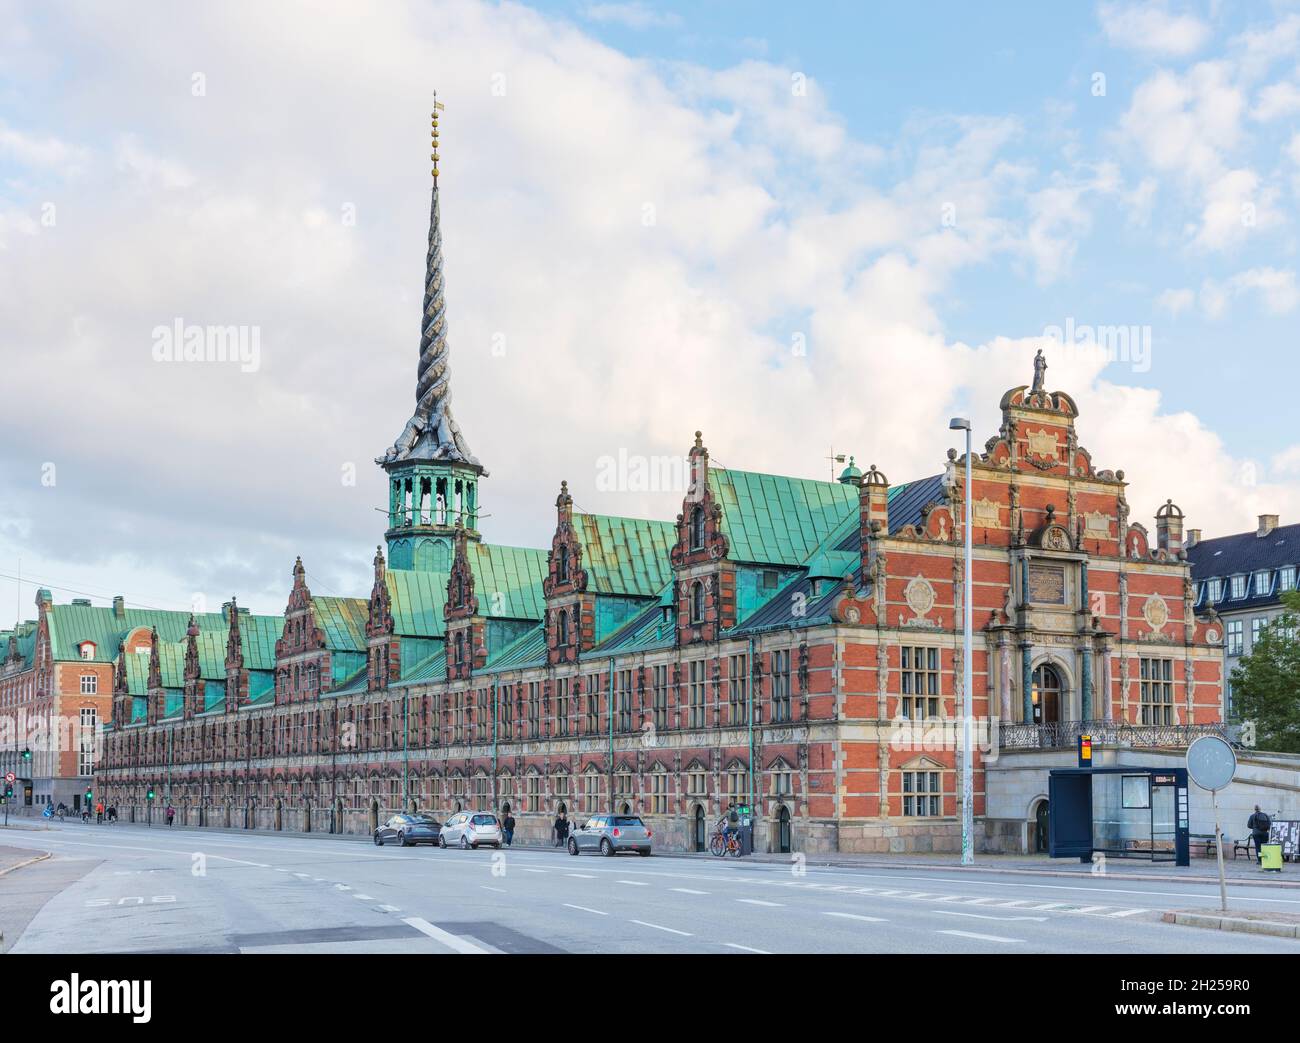 Børsen. the historic stock exchange building with its remarkable twisted tower at Copenhagen, Cenmark Stock Photo